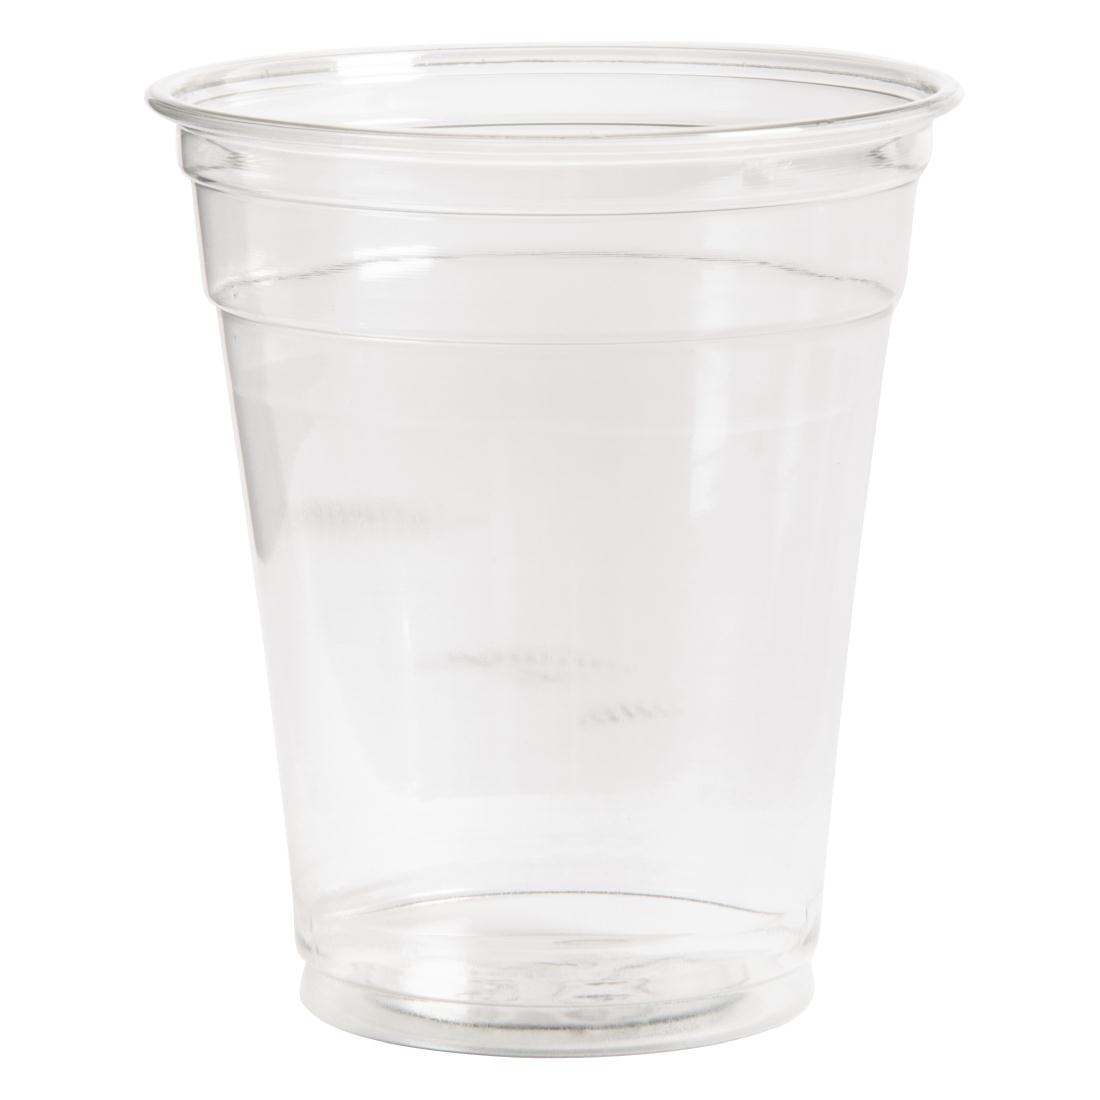 Clear PET Smoothie Cup